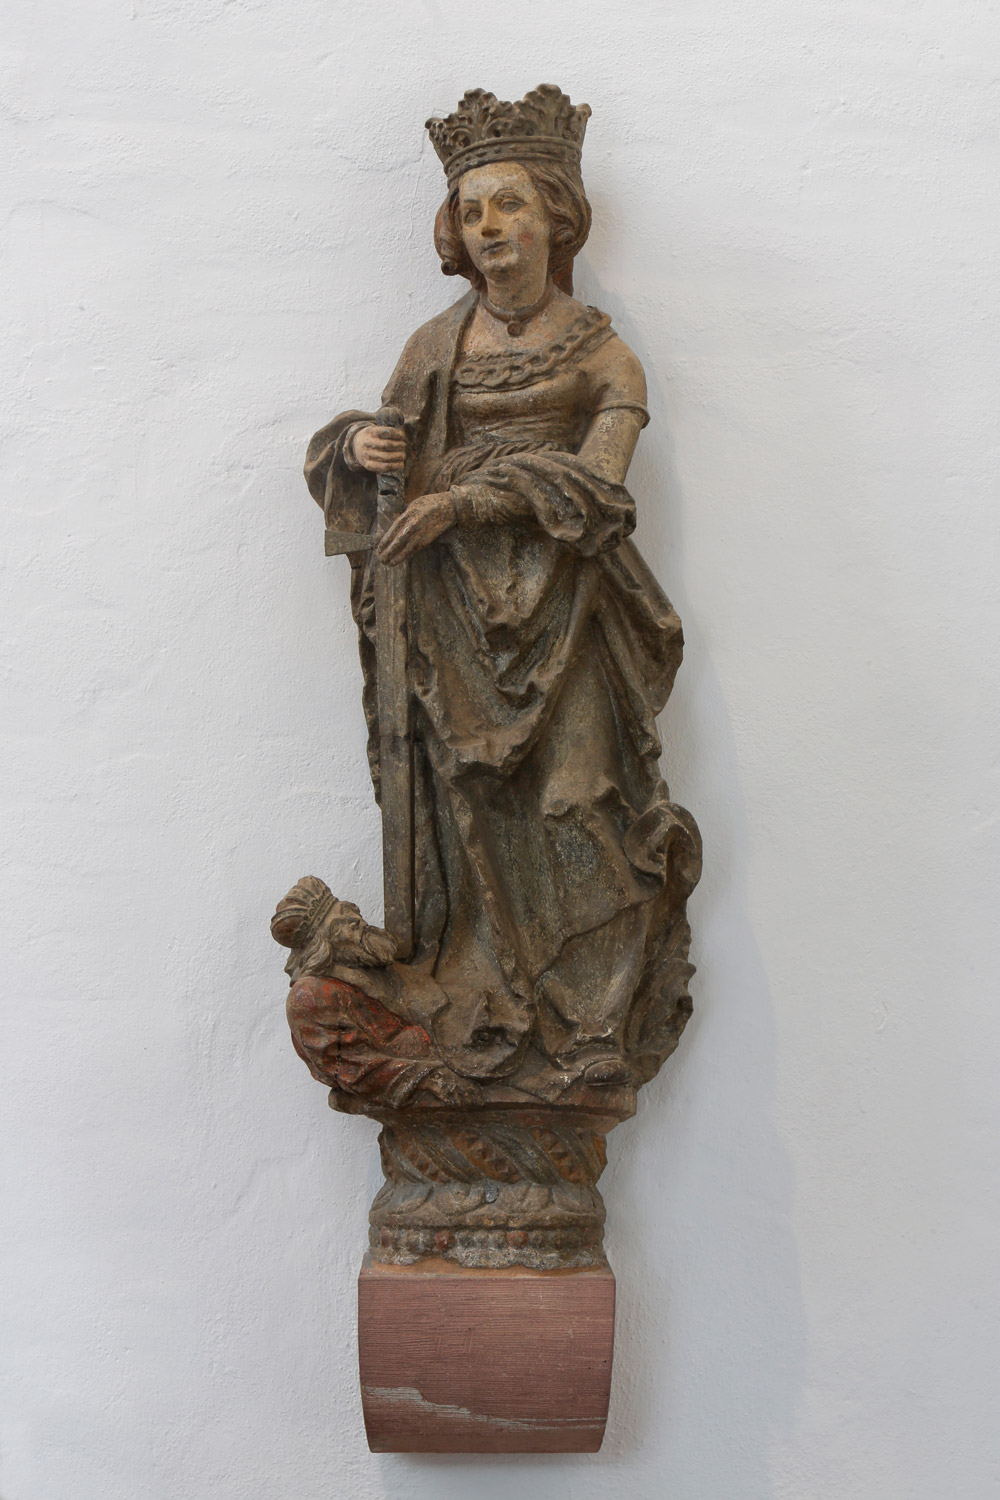 Statue of Saint Catherine from the sixteenth century